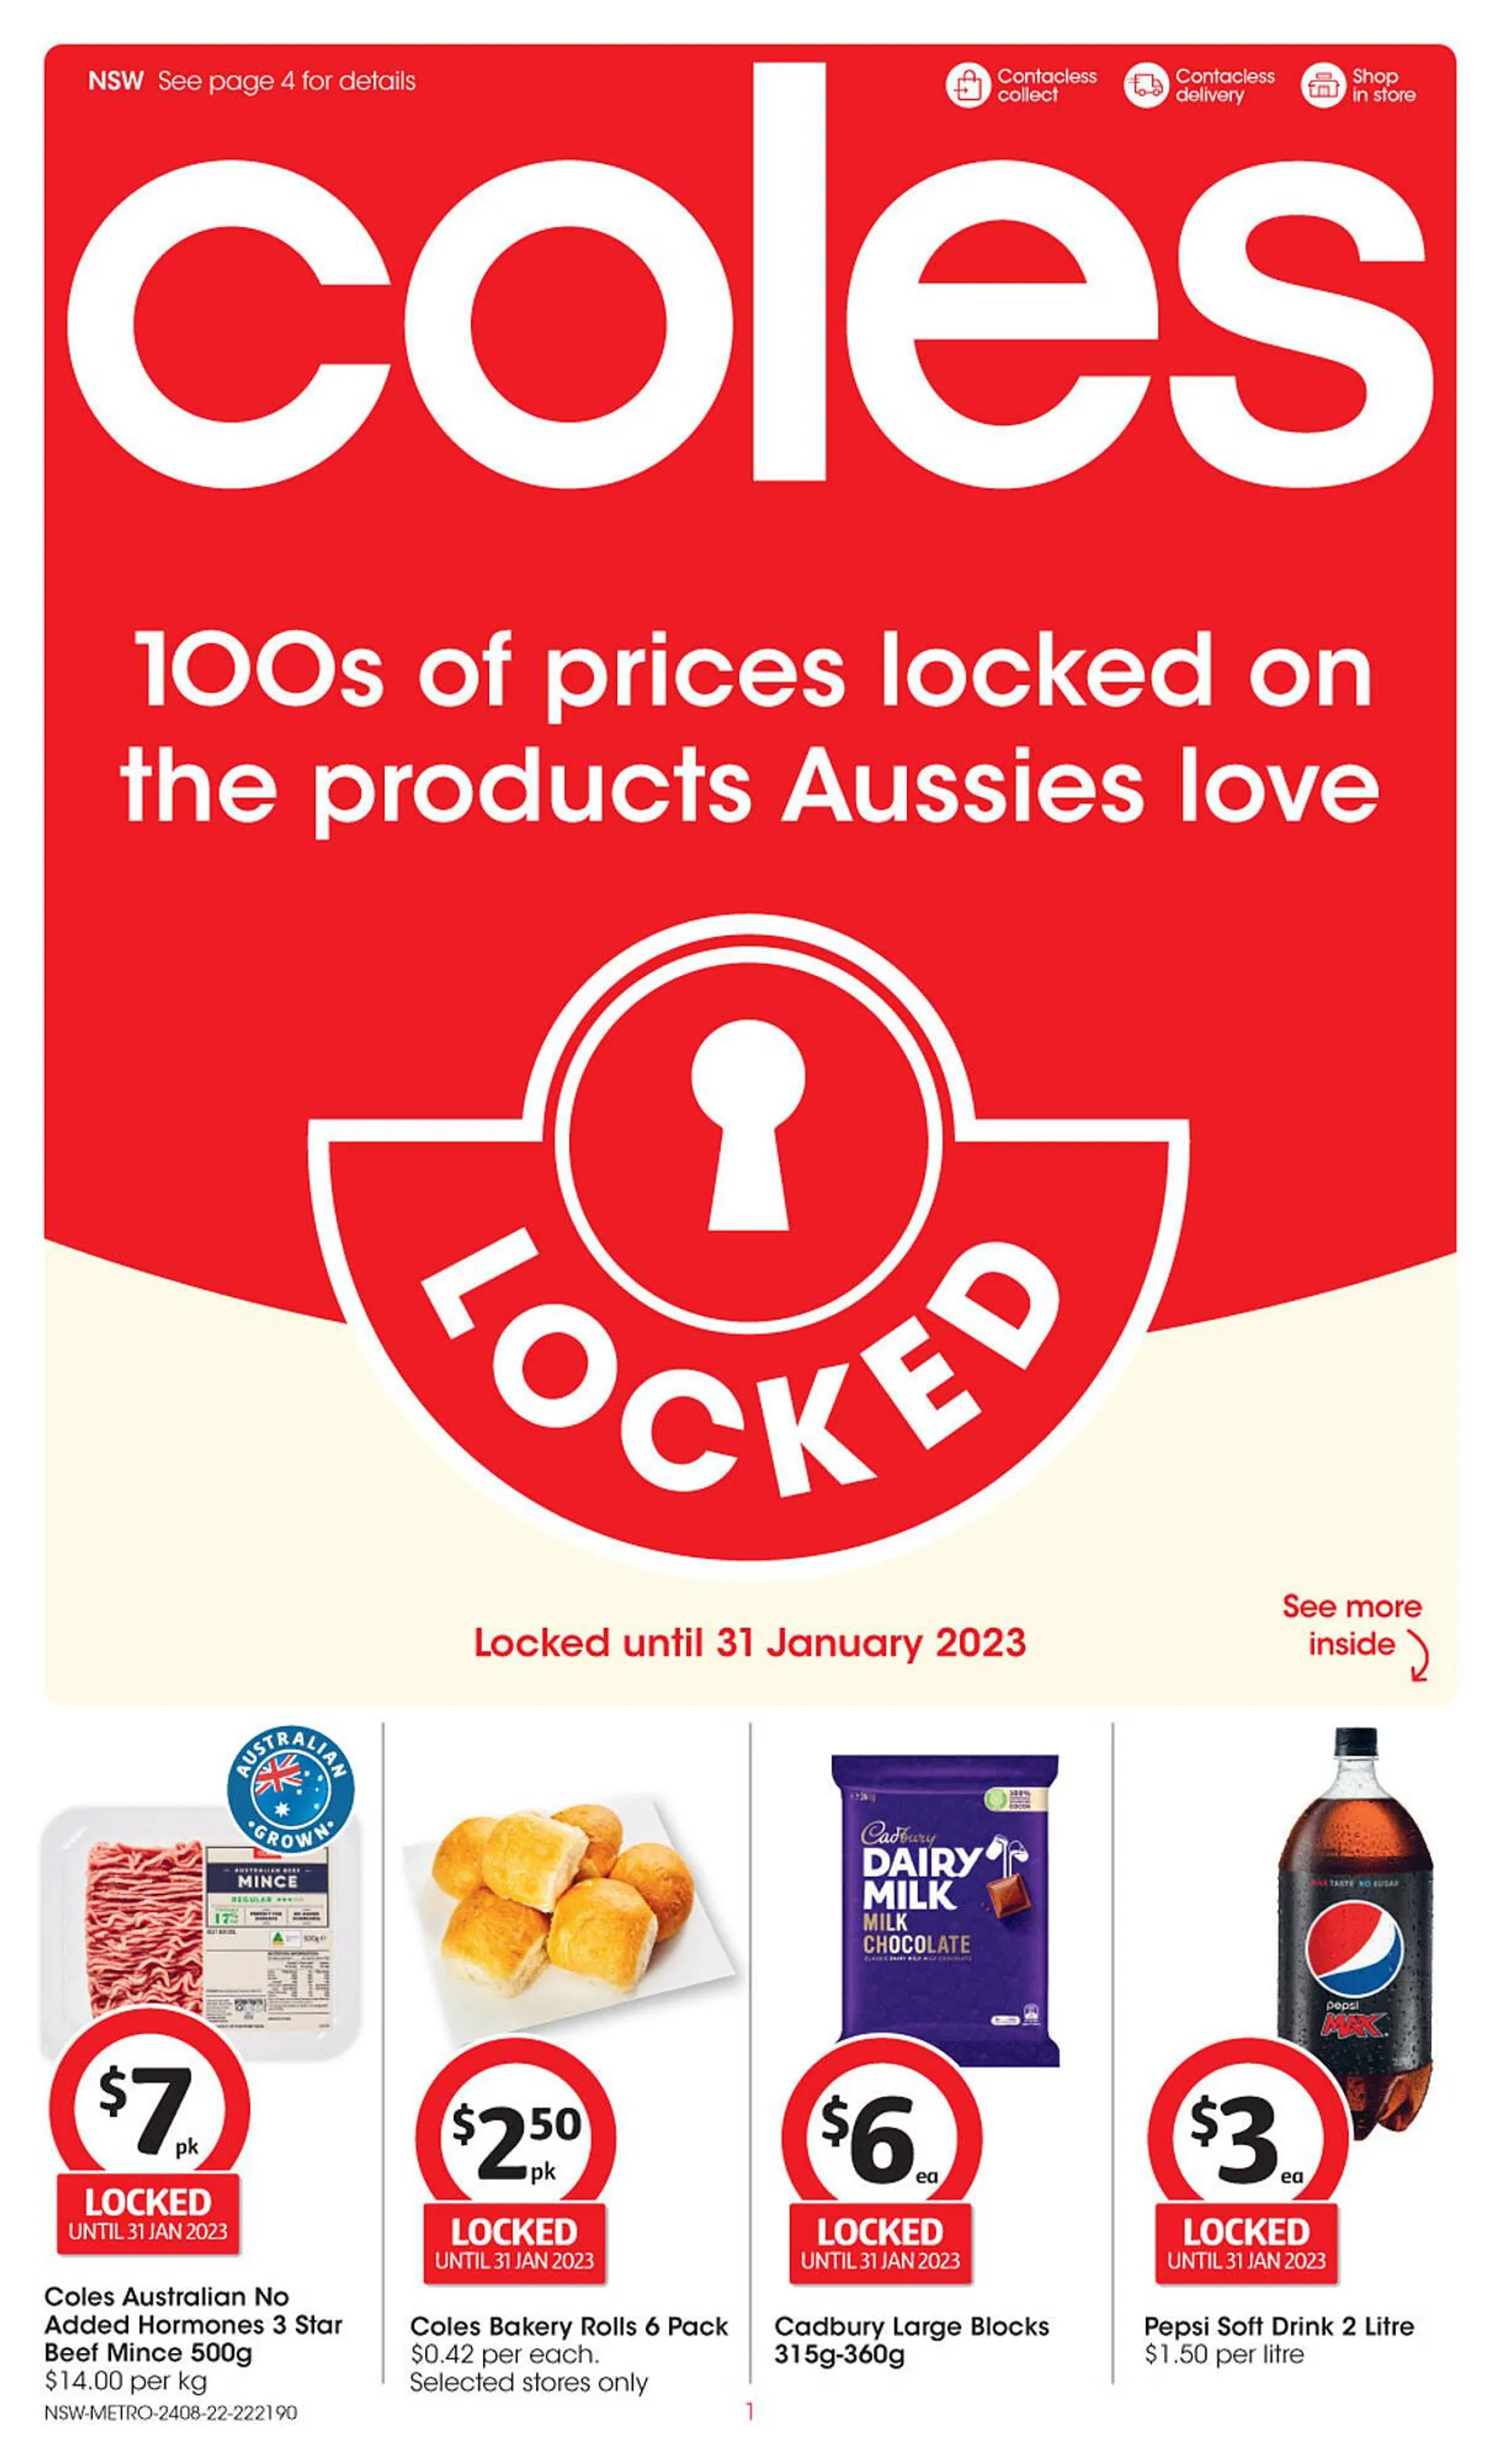 Coles catalogue - 100s of Prices Locked - 1